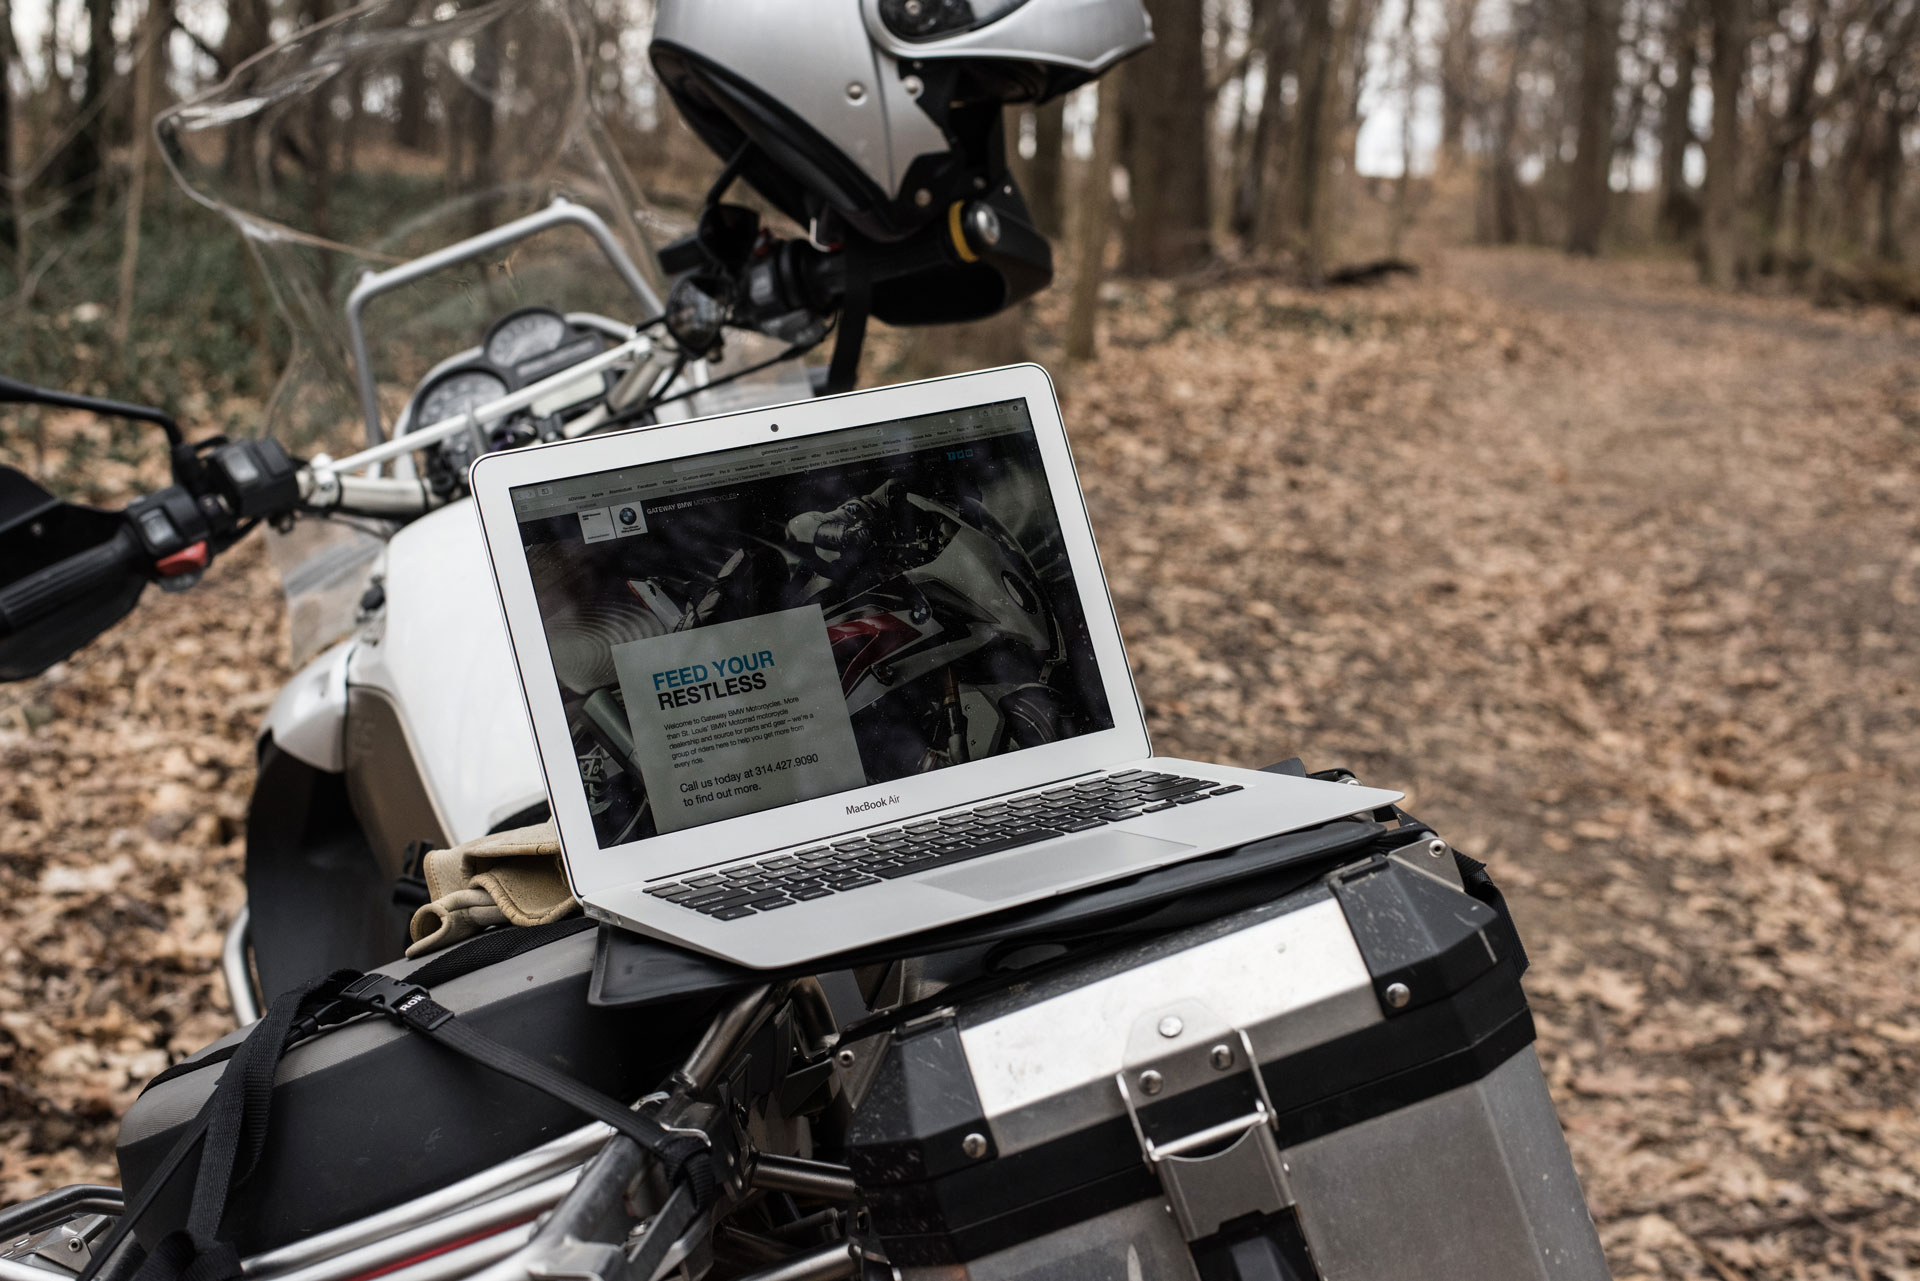 Laptop on a motorcycle displaying the Gateway BMW website